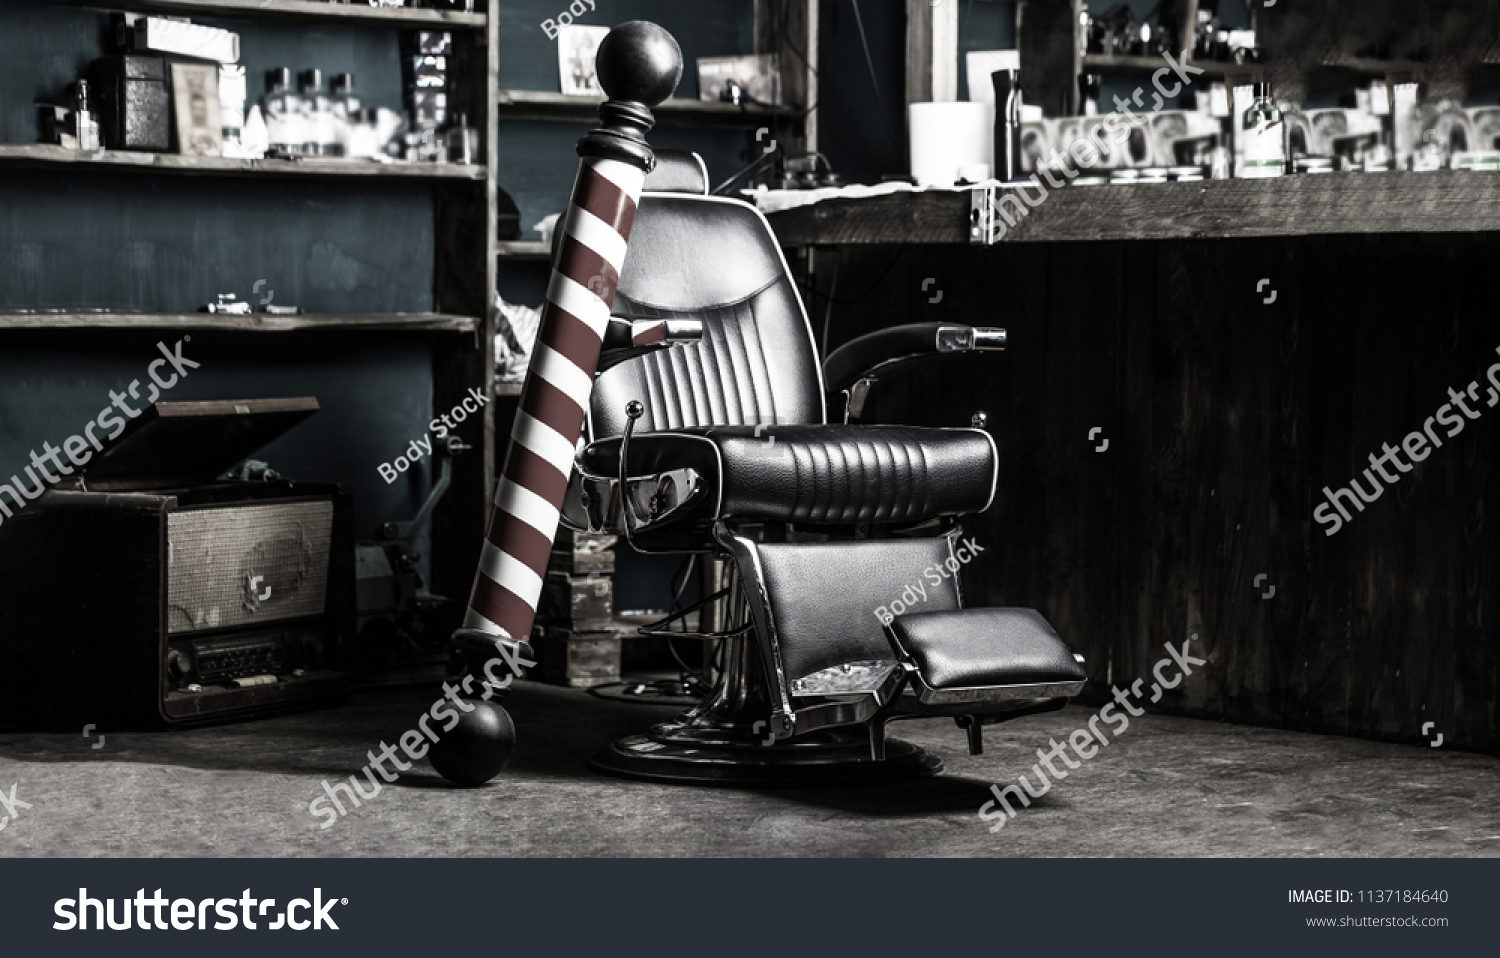 Logo of the barbershop, symbol. Stylish vintage barber chair. Hairstylist in barbershop interior. Barber shop chair. Barbershop armchair, salon, barber shop for men. Barber shop pole. Black and white. #1137184640